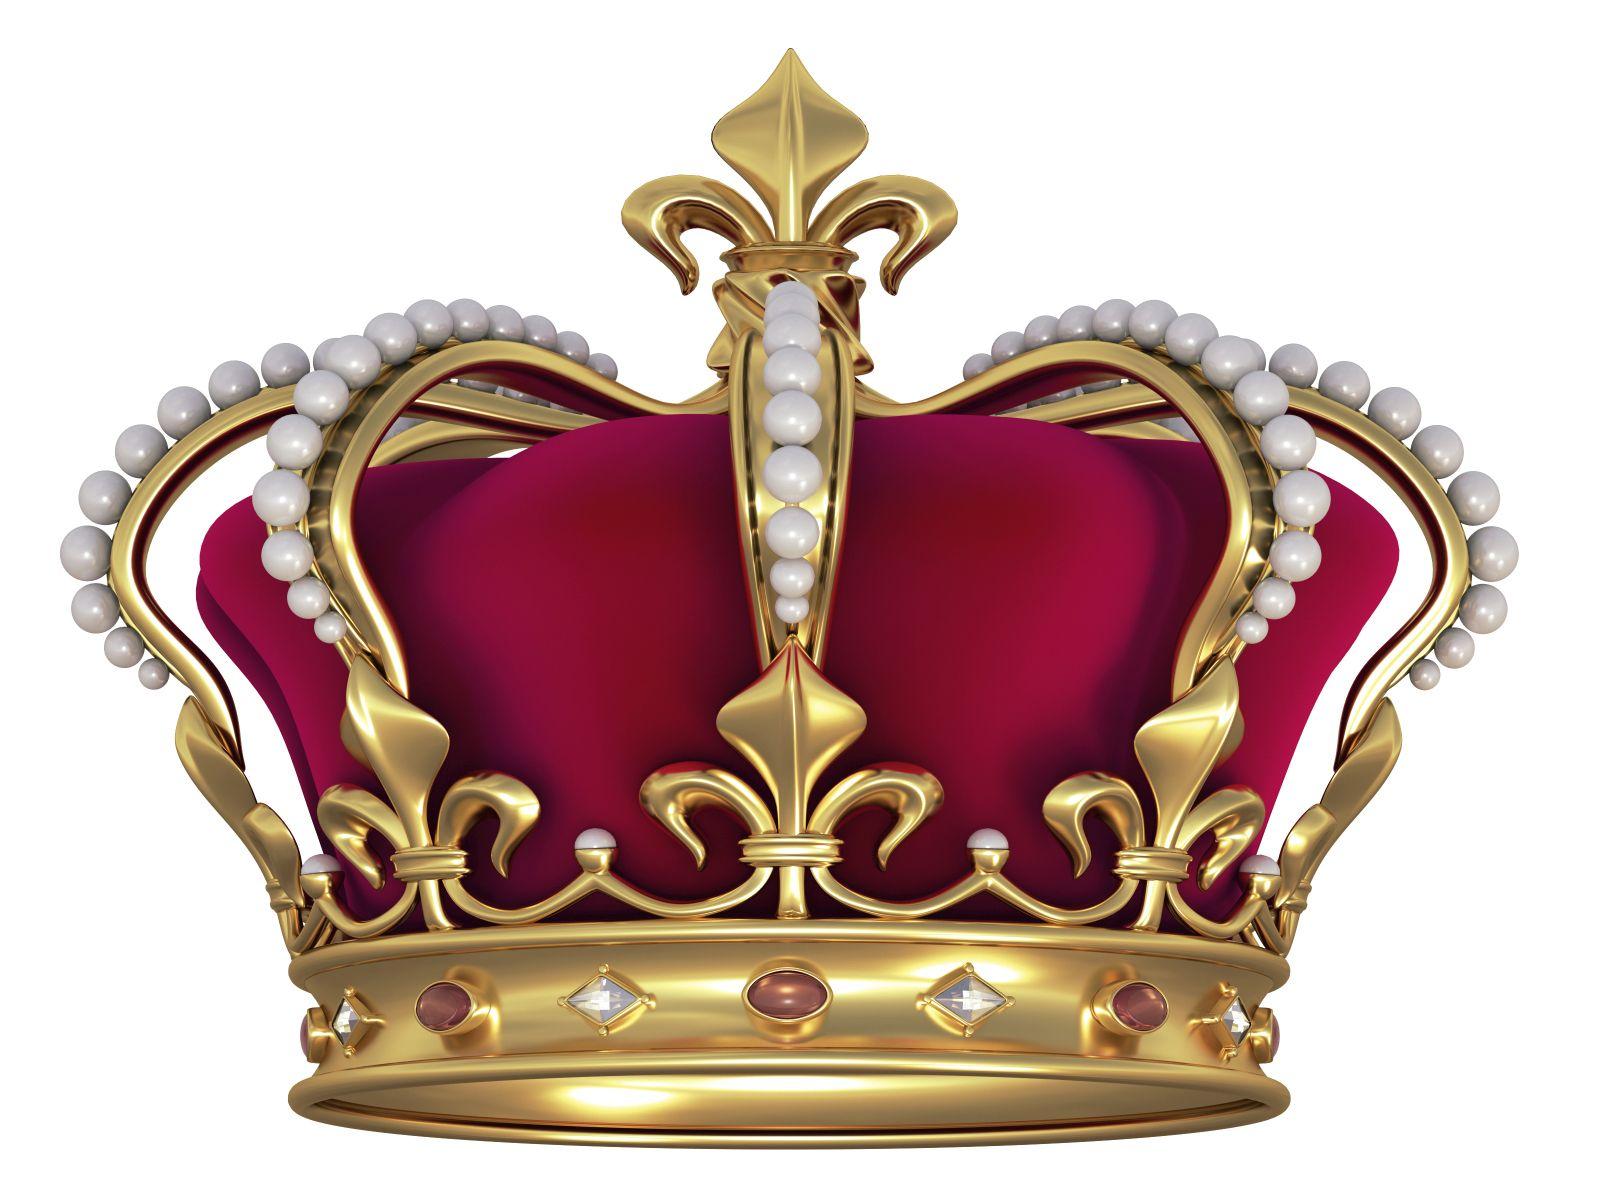 Gold King Crown Logo - Gold crown king free download - RR collections